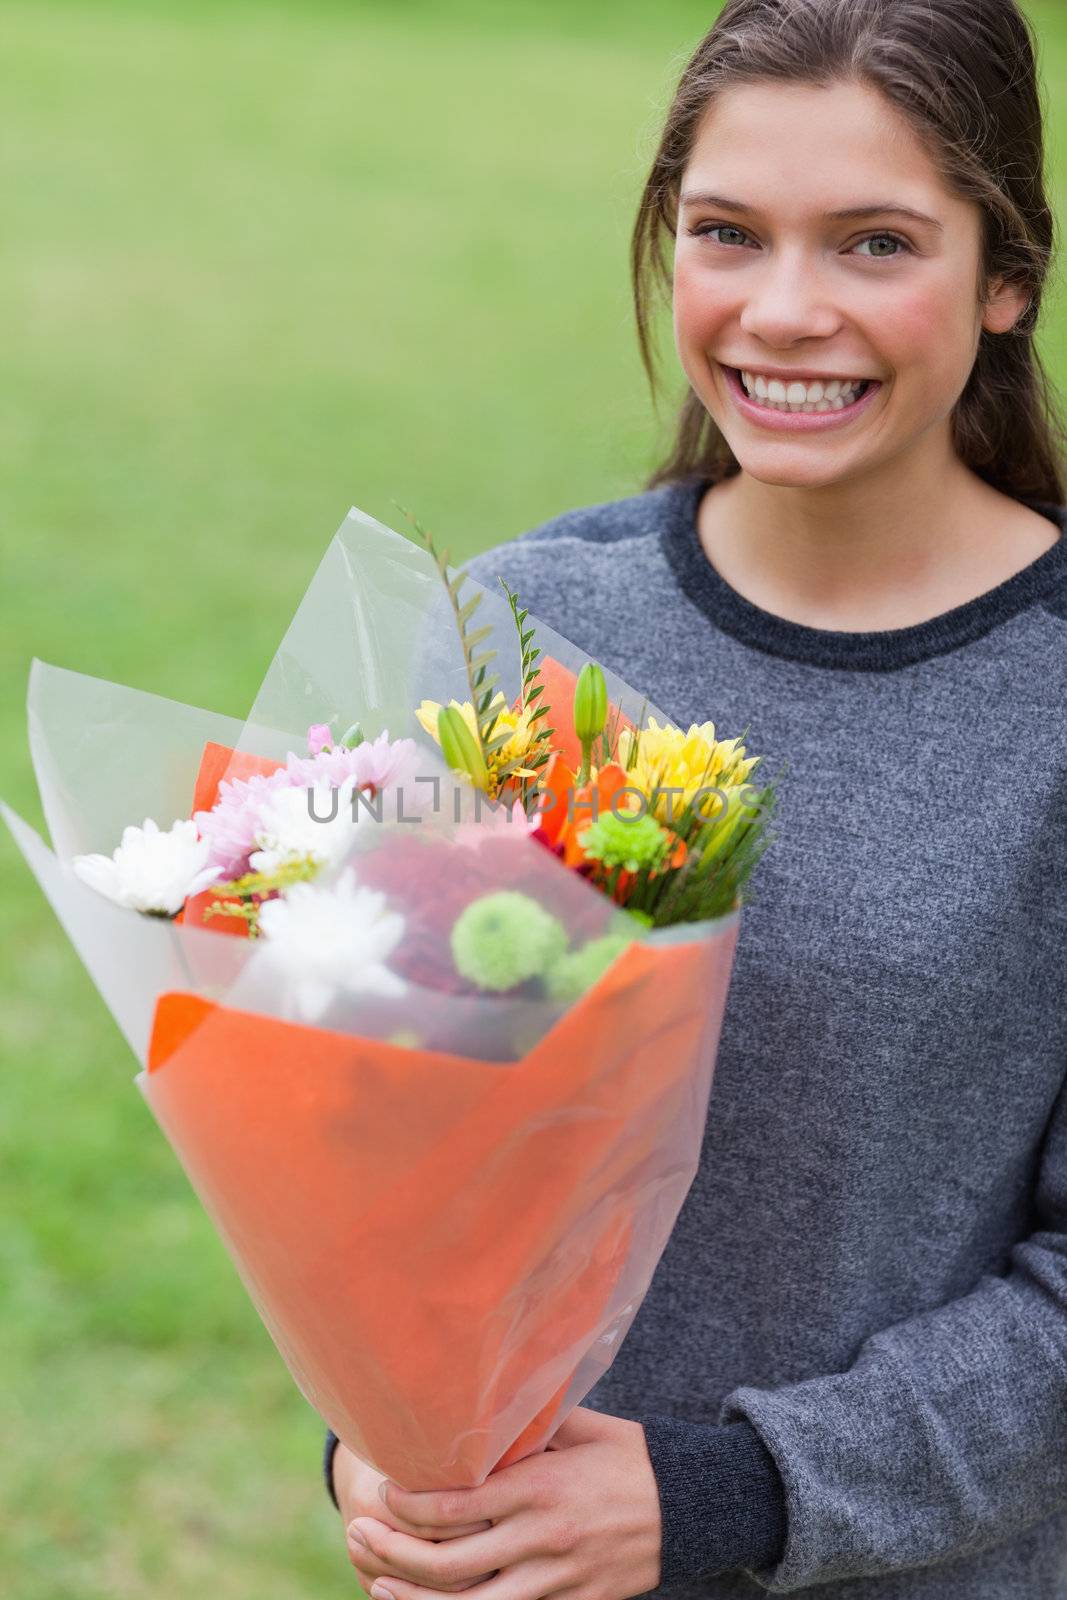 Young girl holding a beautiful bunch of flowers